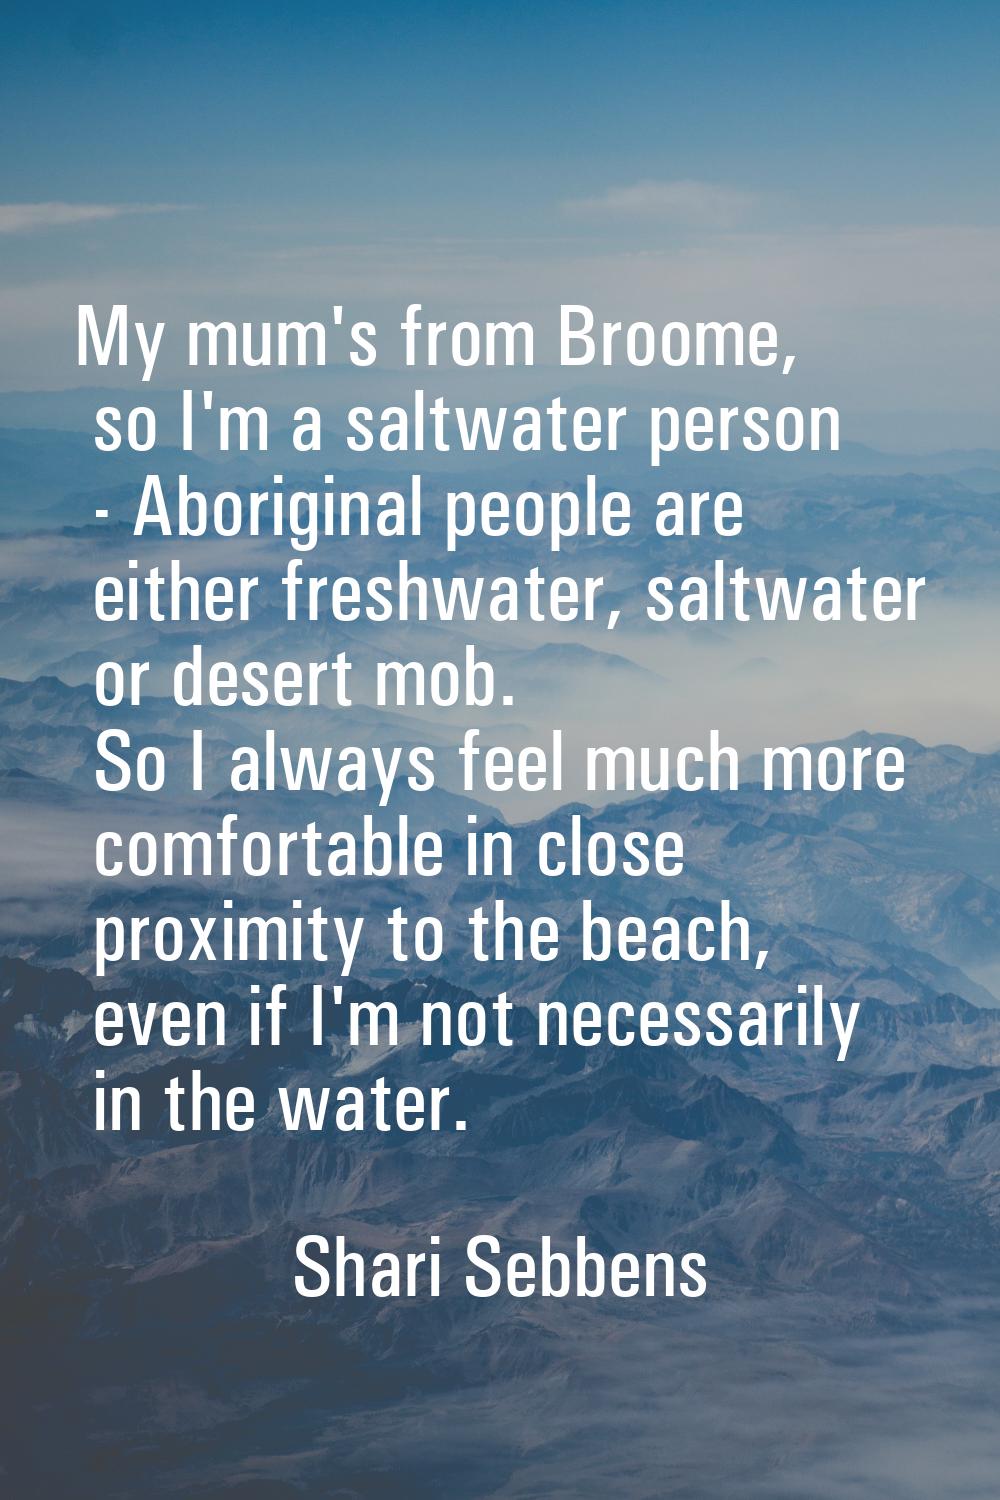 My mum's from Broome, so I'm a saltwater person - Aboriginal people are either freshwater, saltwate